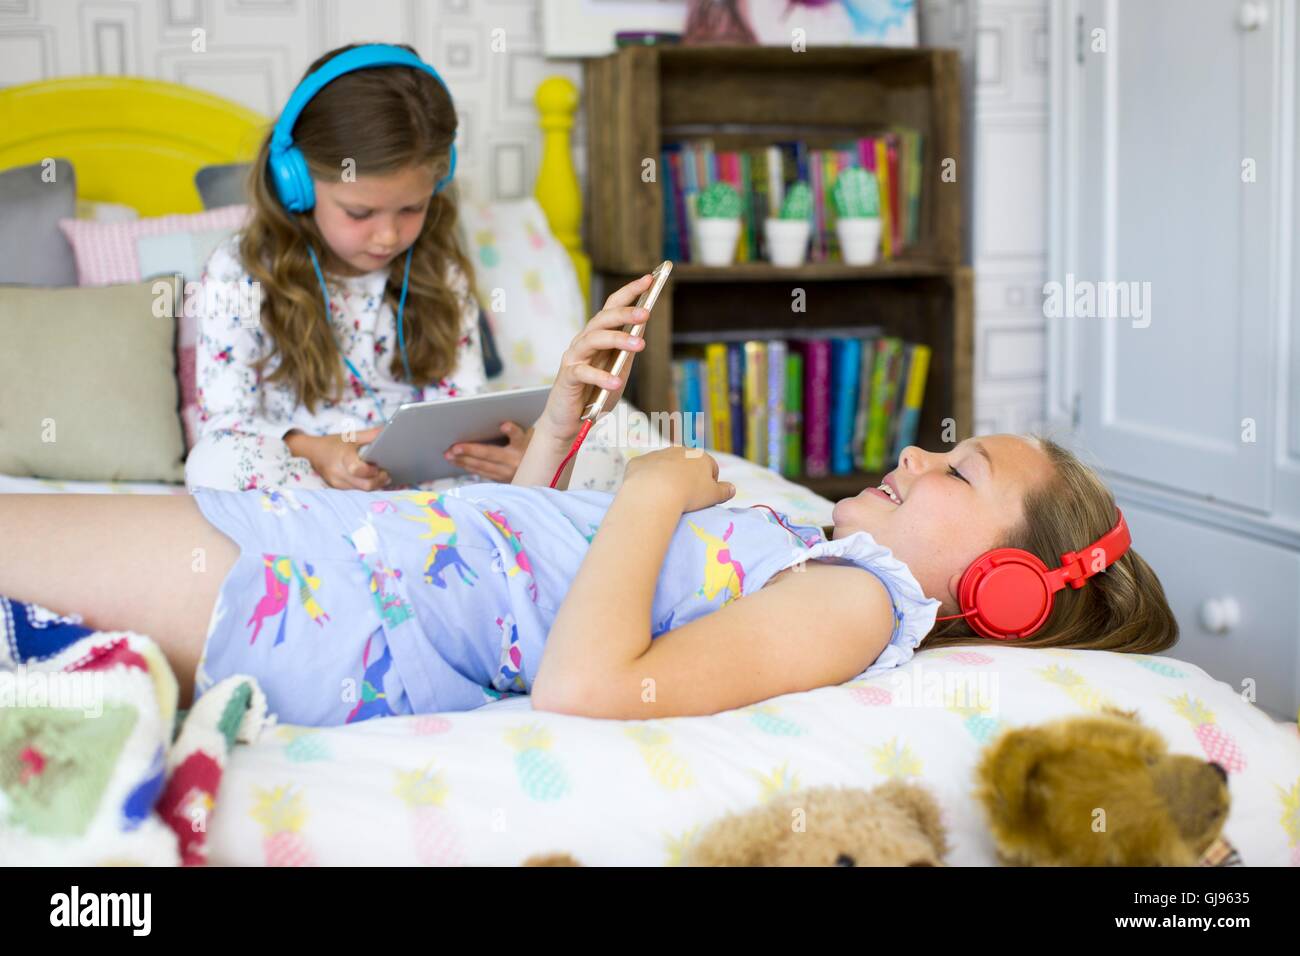 PROPERTY RELEASED. MODEL RELEASED. Two sisters in bedroom listening to music and watching movies. Stock Photo